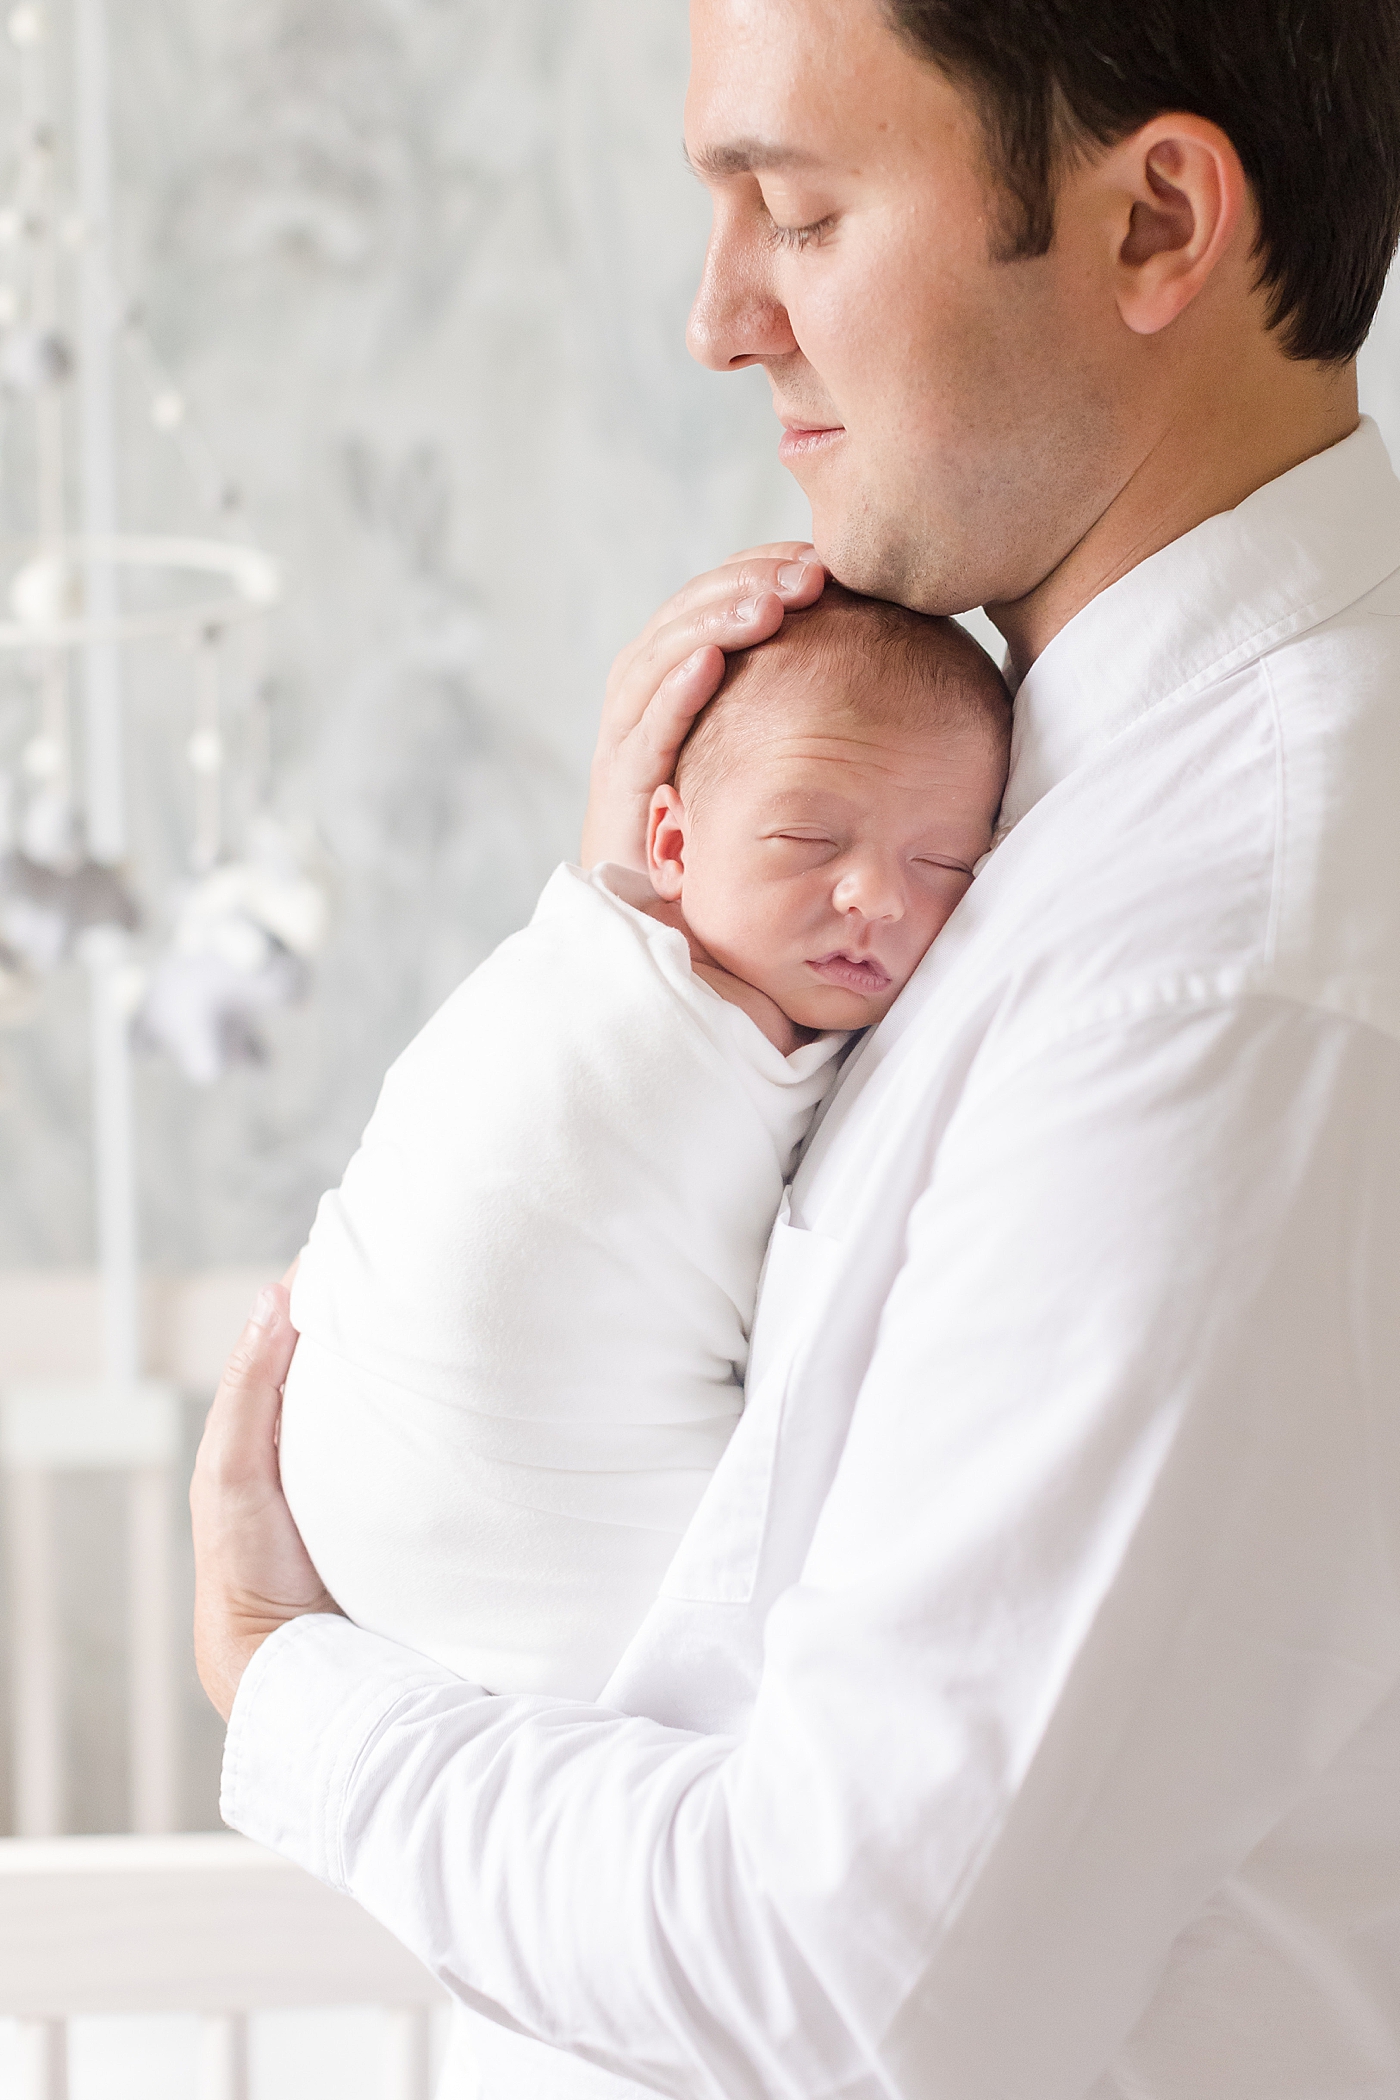 during their Lifestyle Newborn Session | Image by Emily Gerald Photography